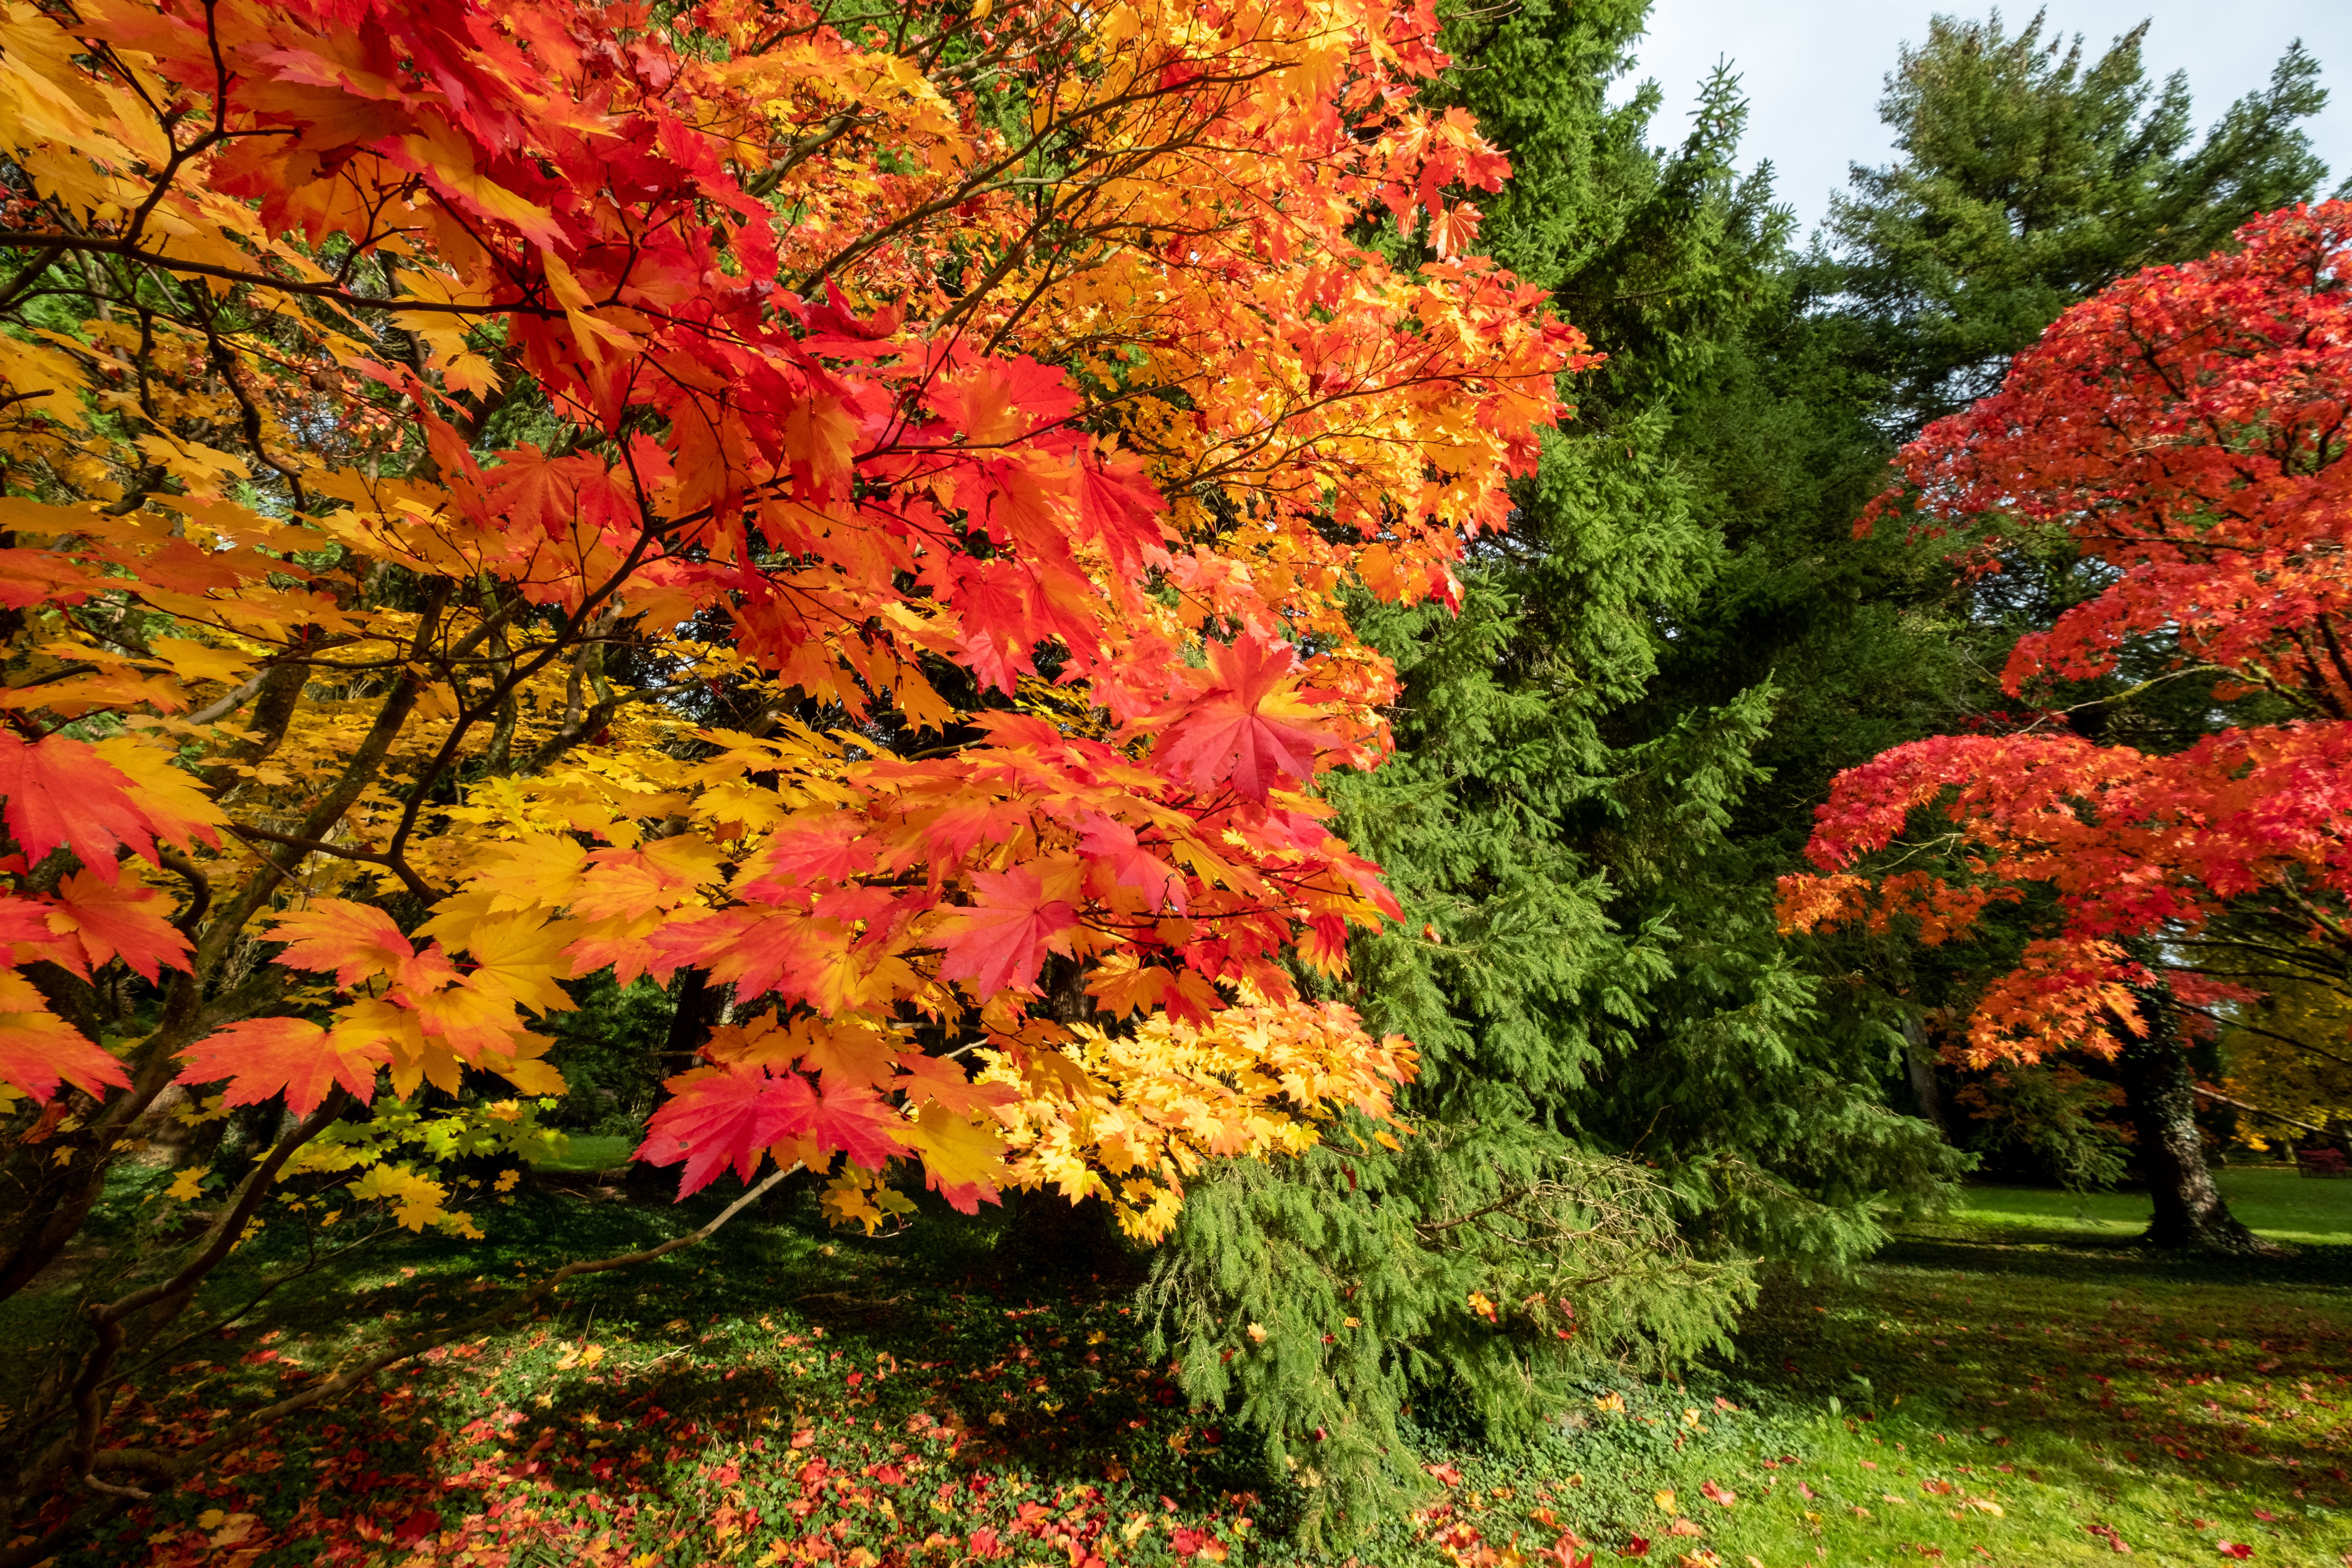 Acer and maple trees in a blaze of autumn colour, photographed at Westonbirt Arboretum, Gloucestershire, UK.